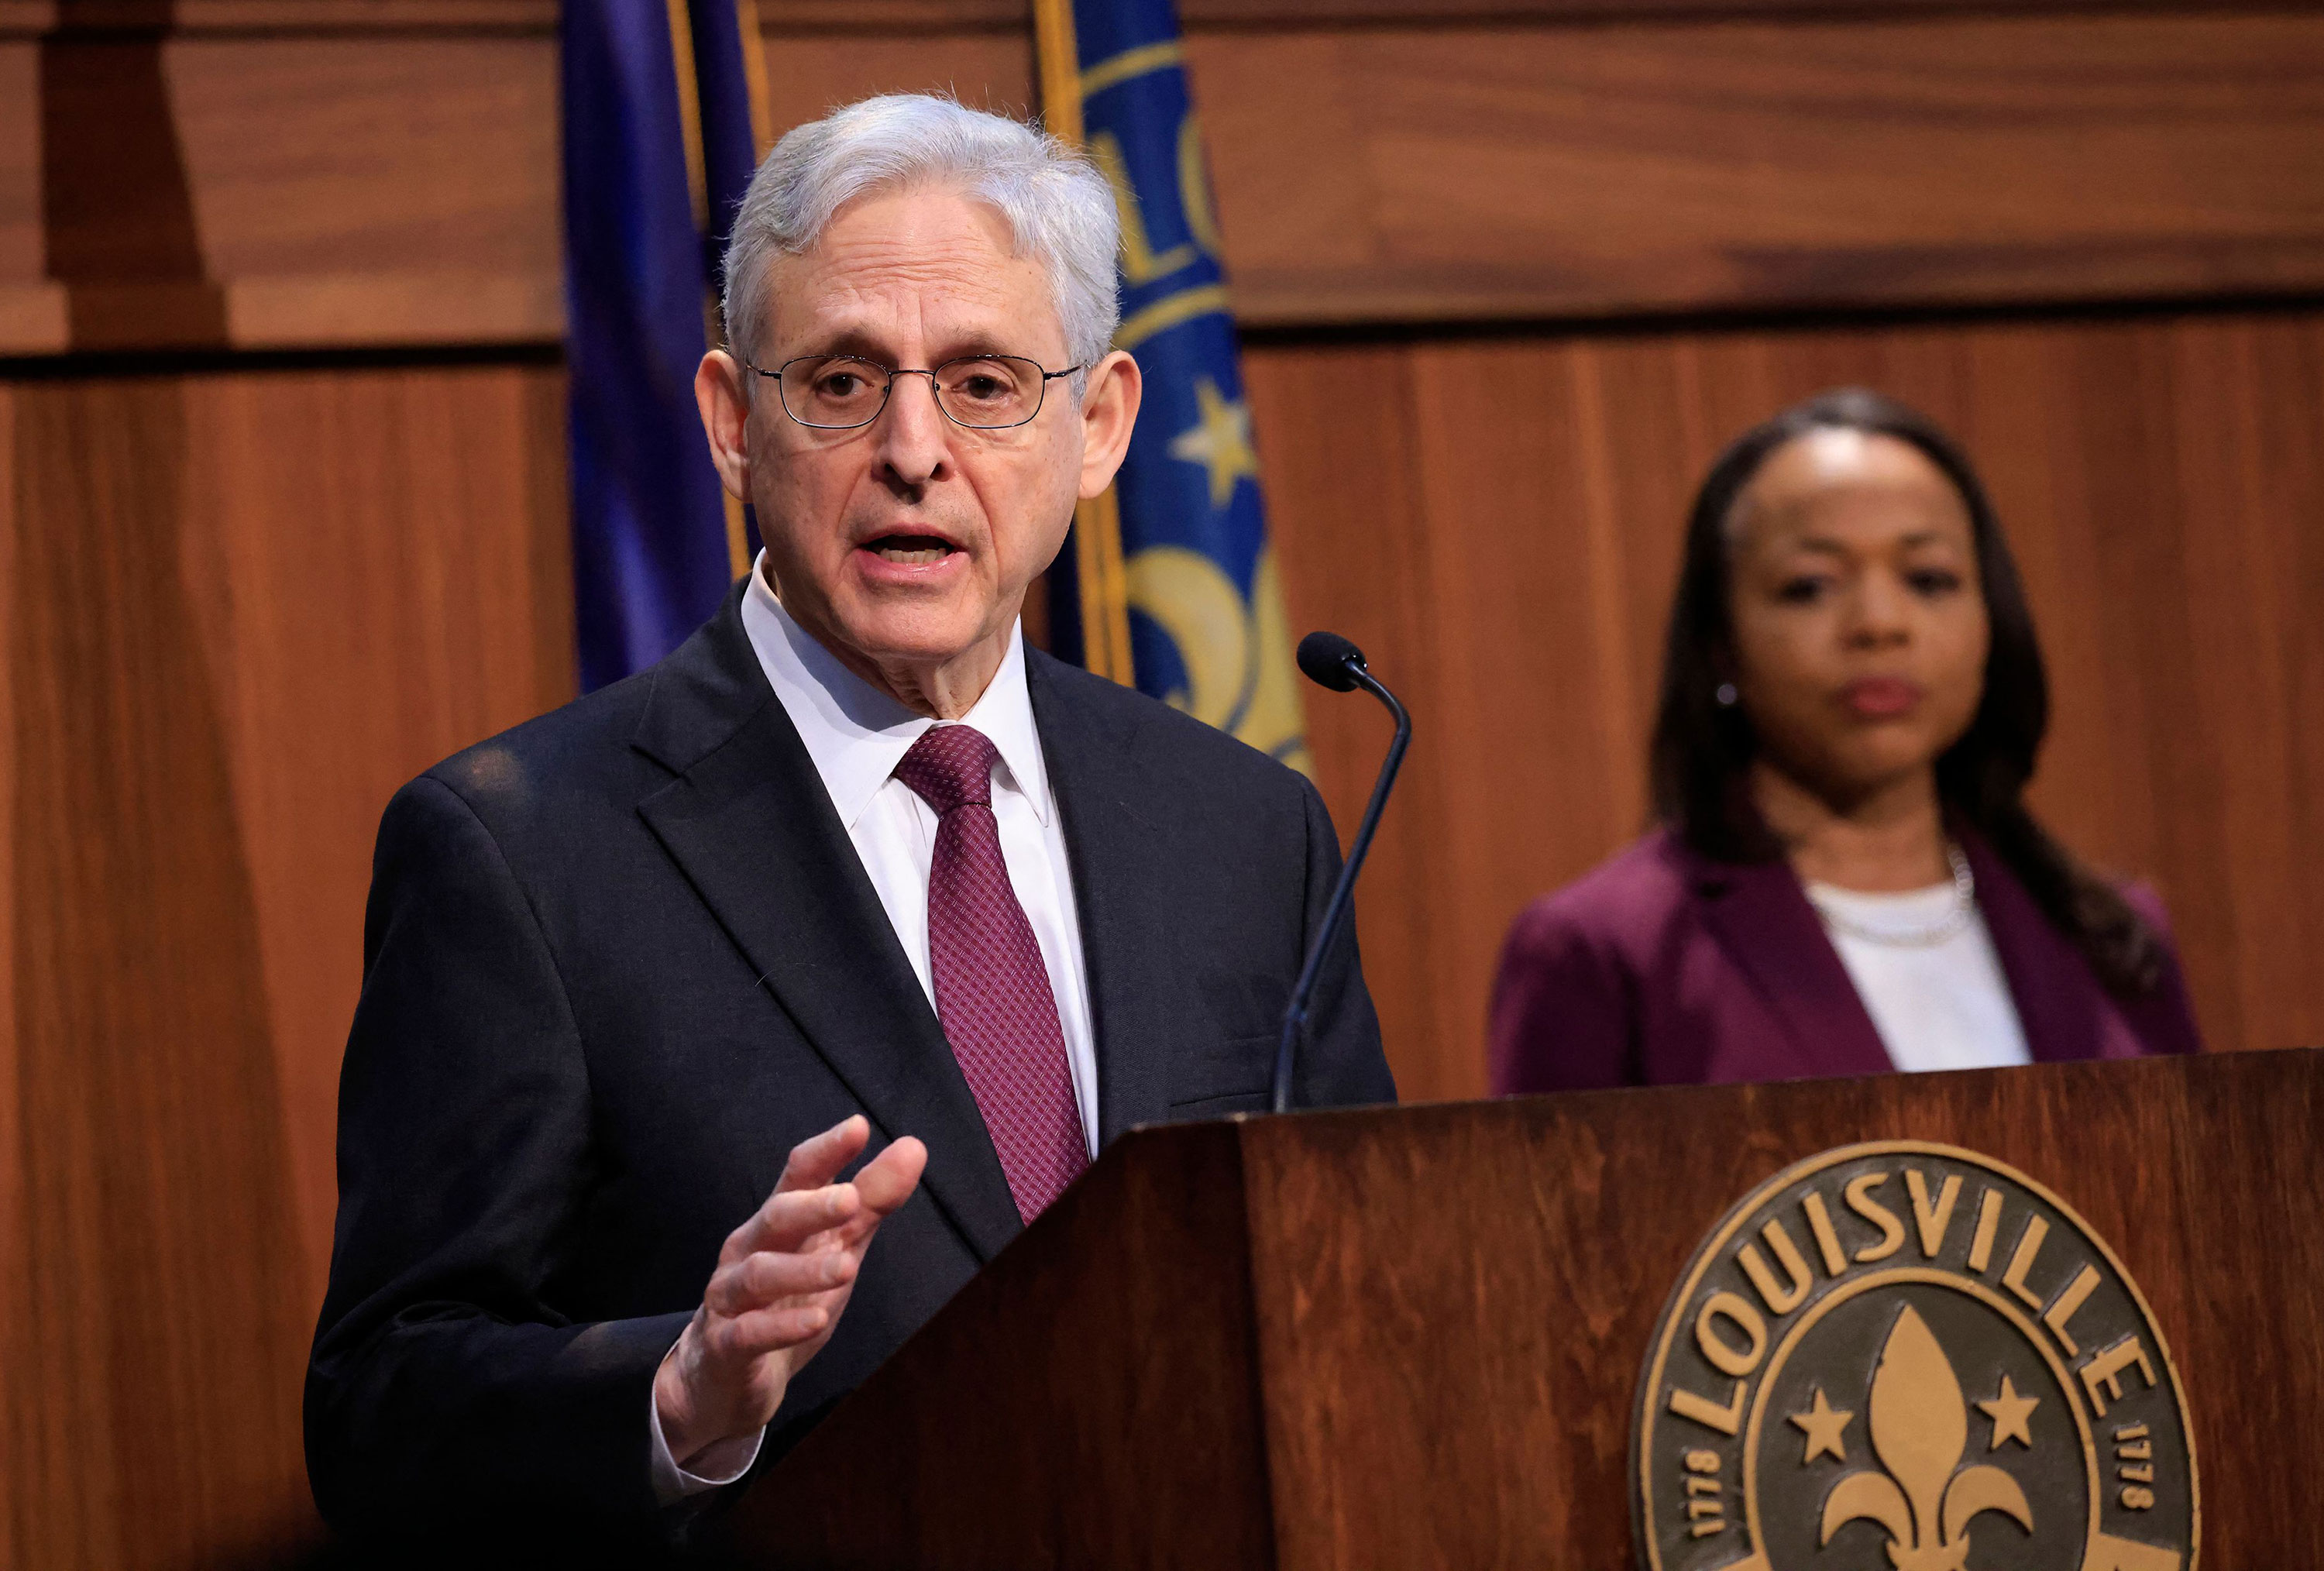 Garland details aggressive behavior and racial epithets used by Louisville  police